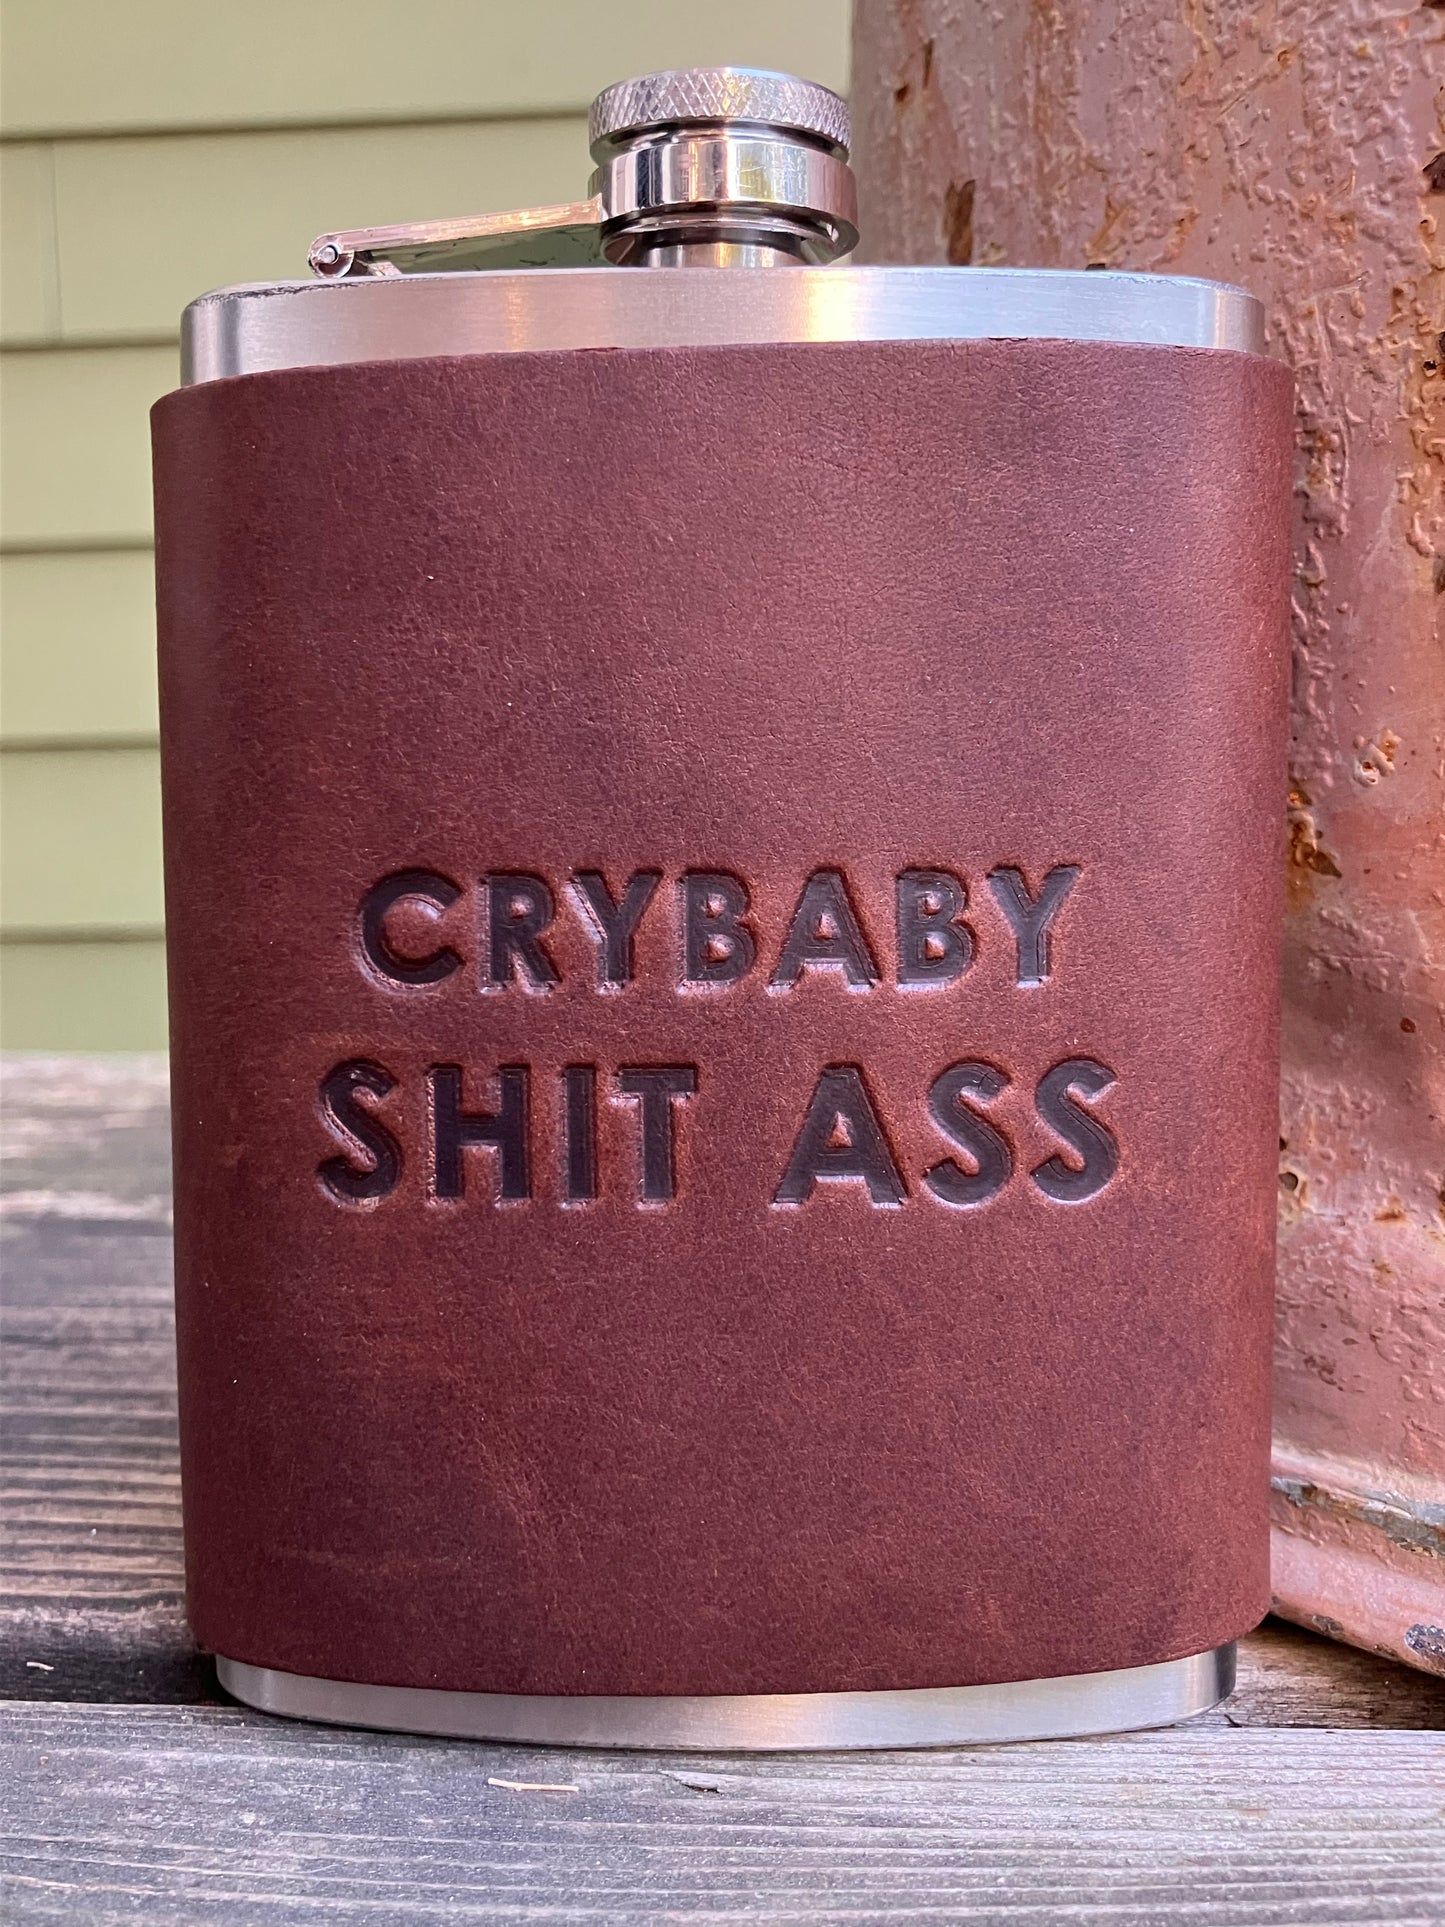 Leather Flask - Crybaby Shit Ass